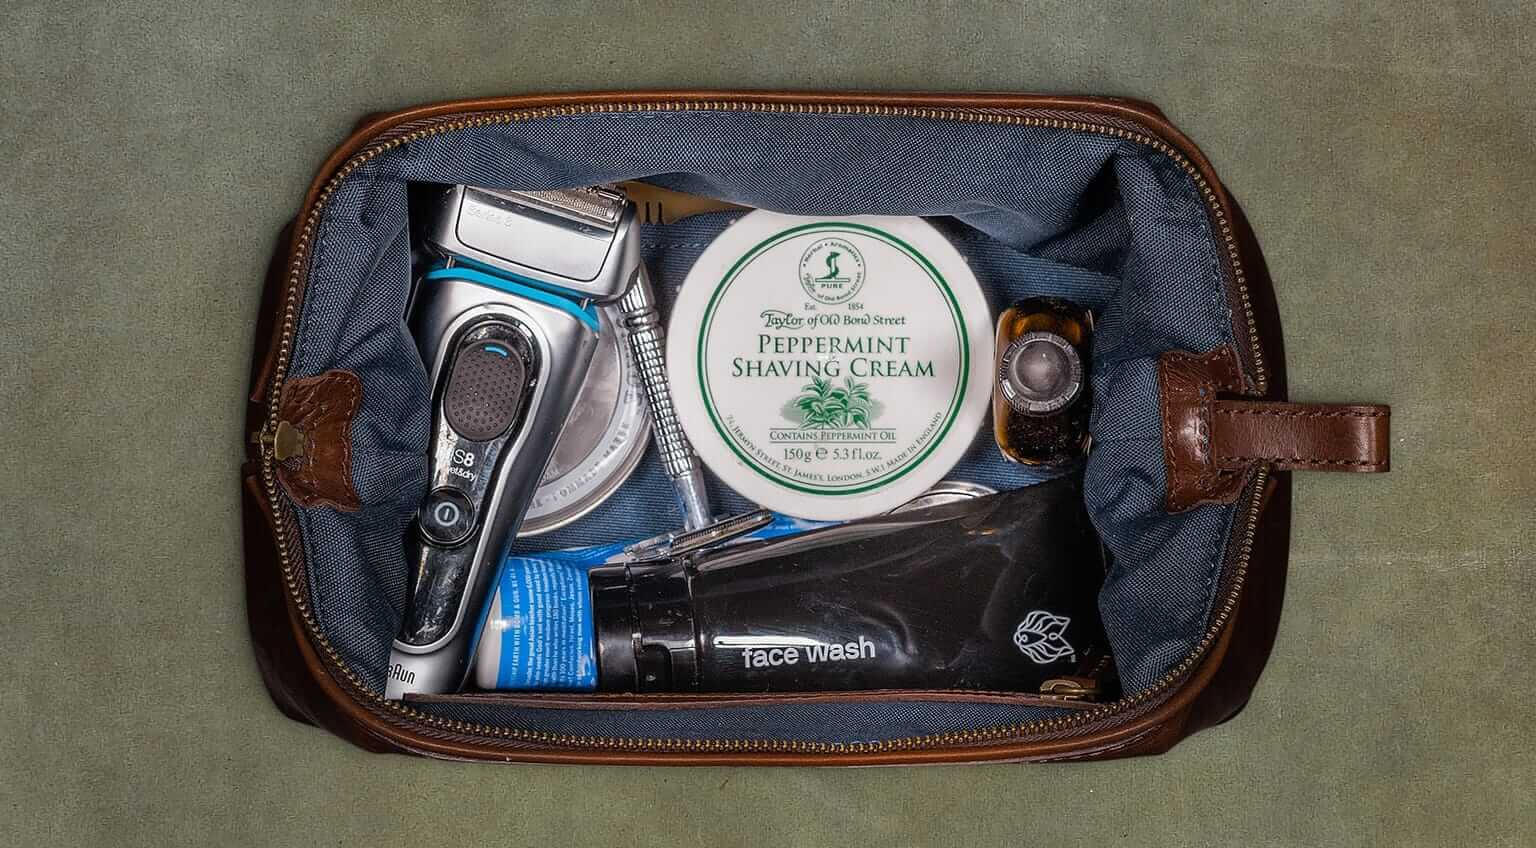 The 9 best toiletry bags of 2023